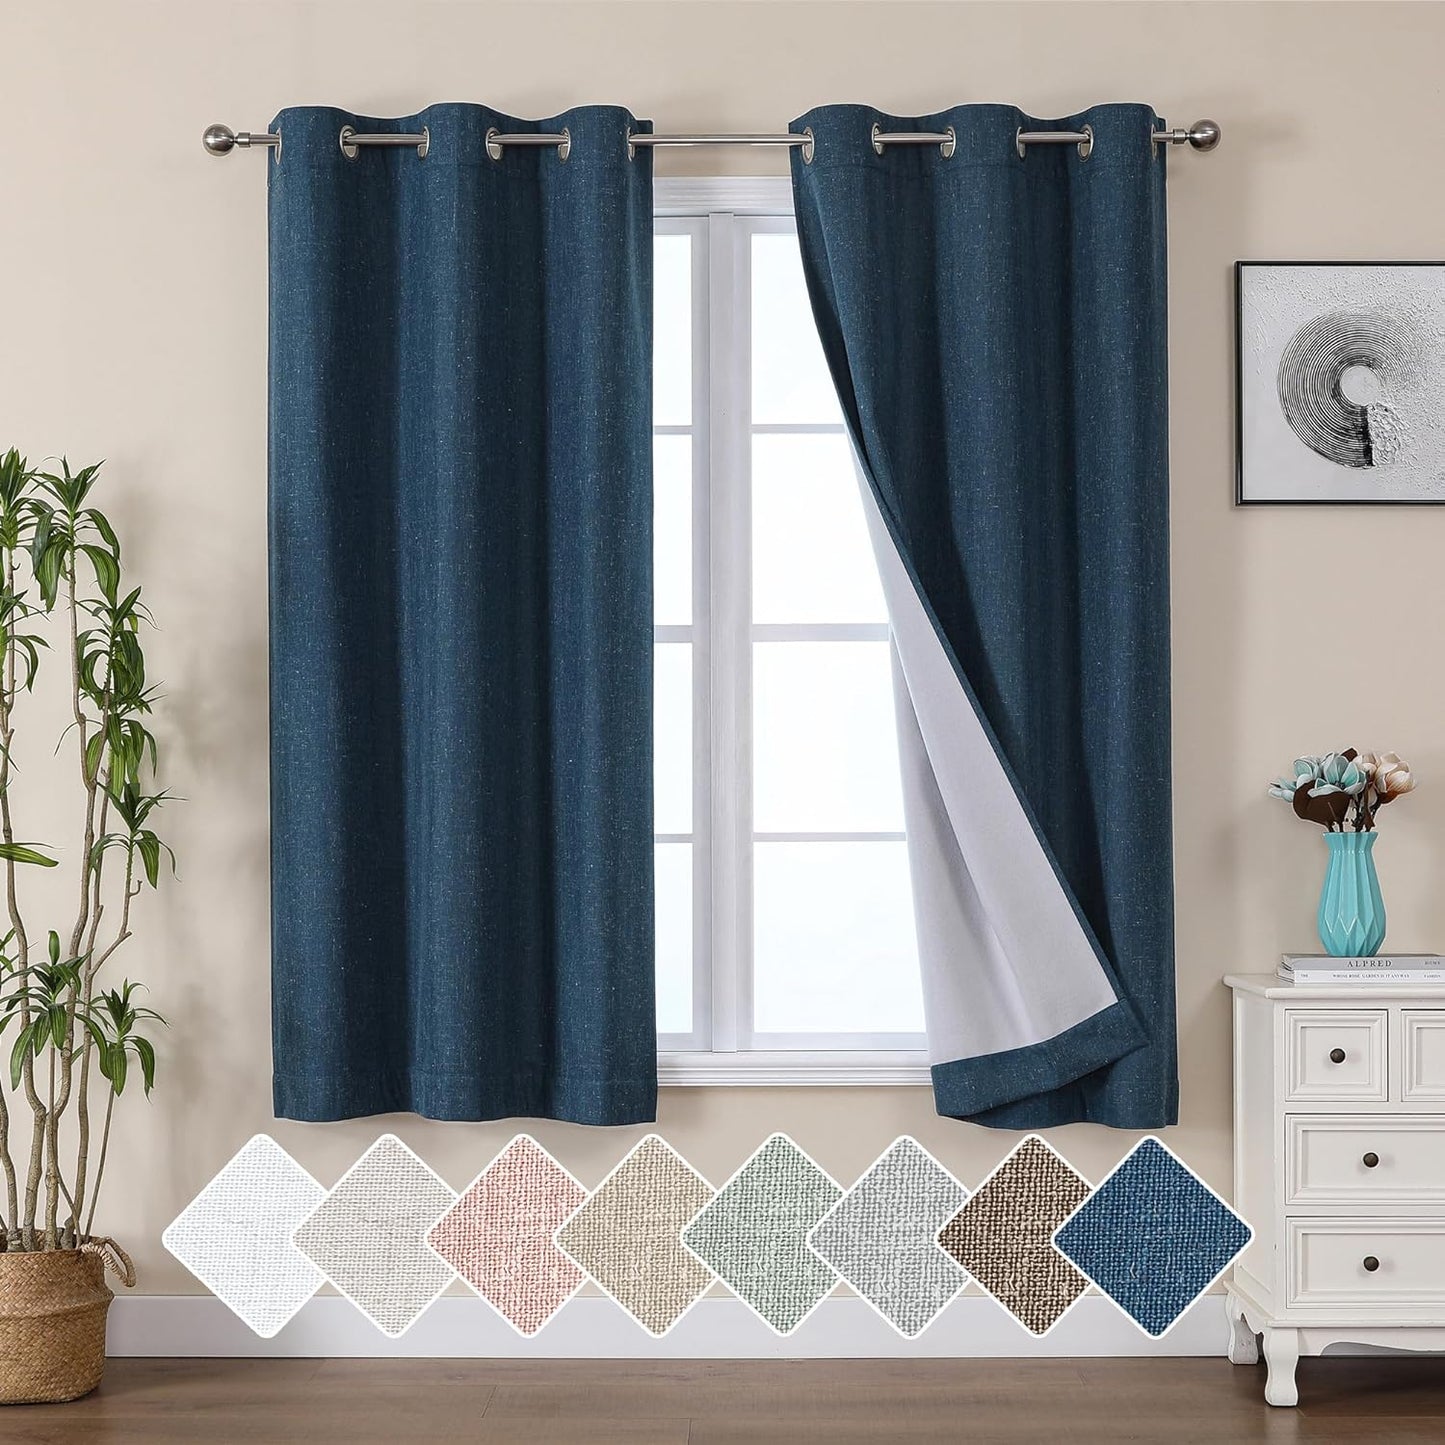 Jenny Ivory Beige Textured Linen 100% Blackout Curtains 63 Inch Length 2 Panels, Energy Saving Window Treatment Heavy Curtain Drapes for Bedroom/Living Room, Burlap Fabric Curtains, 38W  Simplebrand Navy Blue 38"W X 54"L 